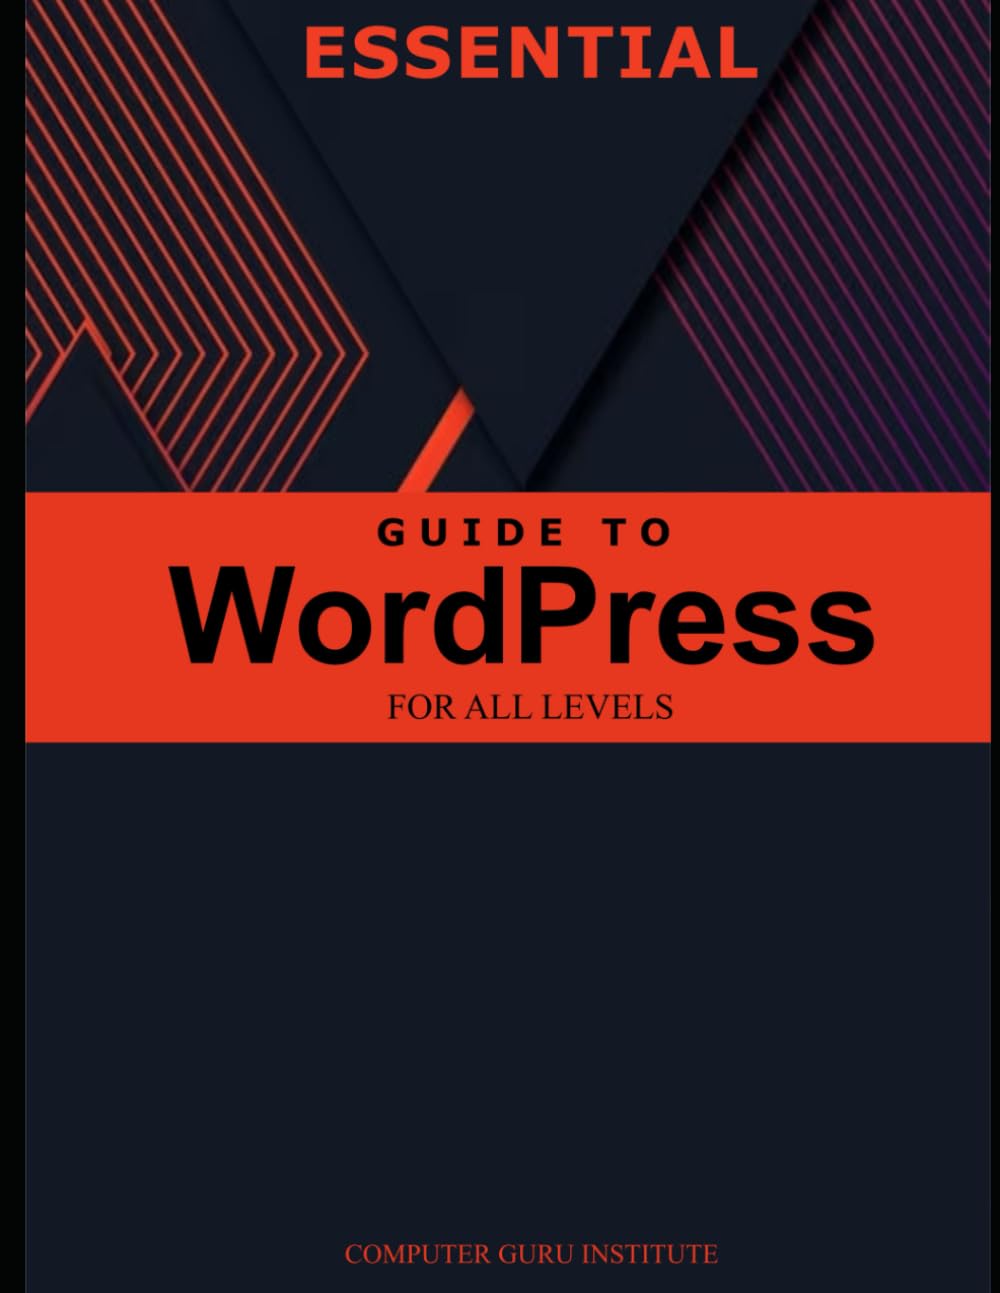 Essential Guide to WordPress